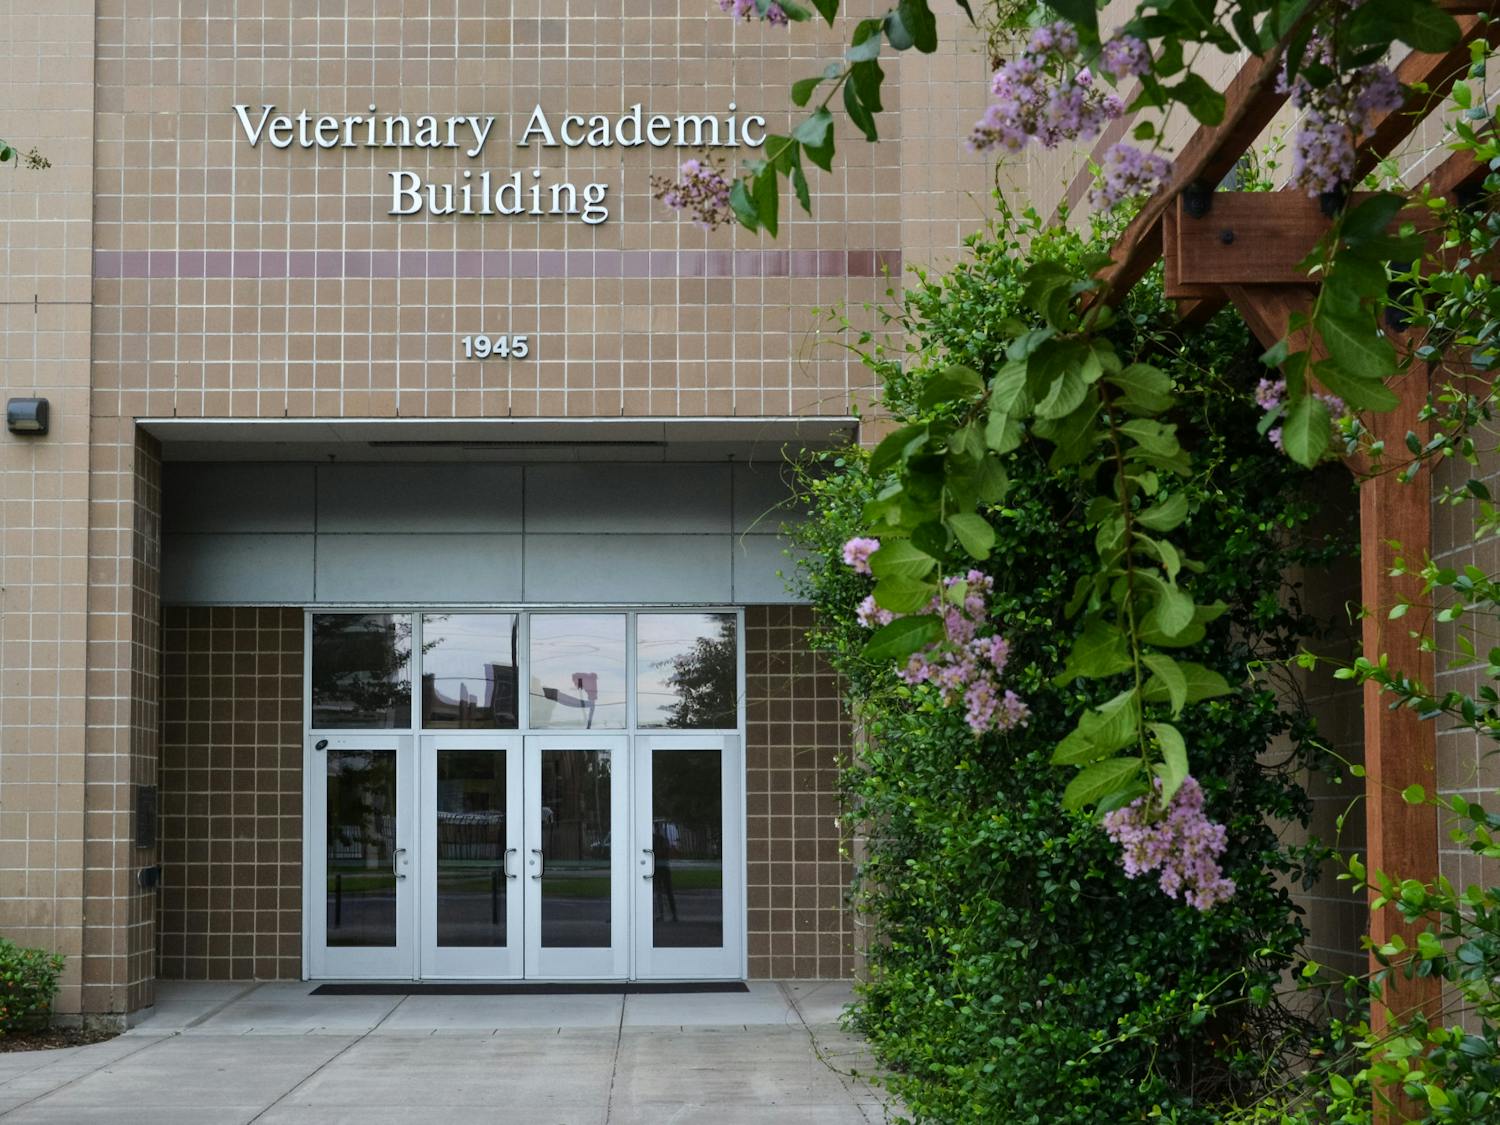 The University of Florida College of Veterinary Medicine’s academic building, located at 1945 SW 16th Ave. on Sunday, July 18, 2021.